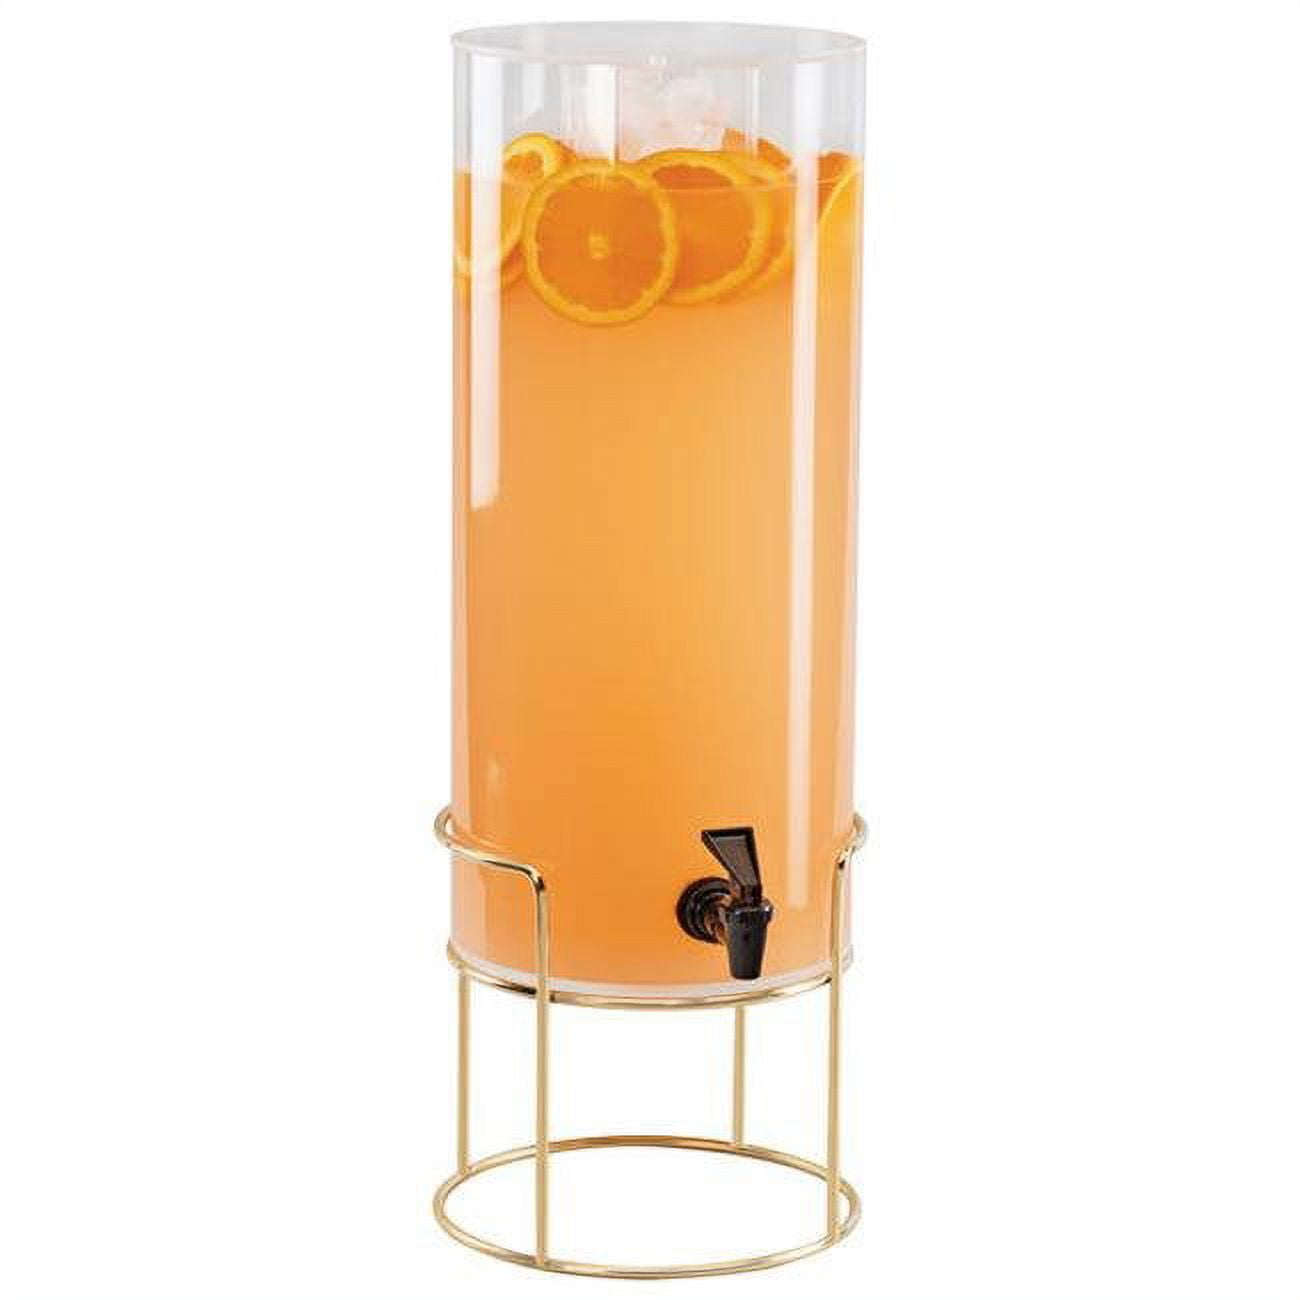 22005-3-46 3 Gal Round Beverage Dispenser With Ice Chamber - Metal Base, Brass - 8.125 X 9.75 X 25.75 In.